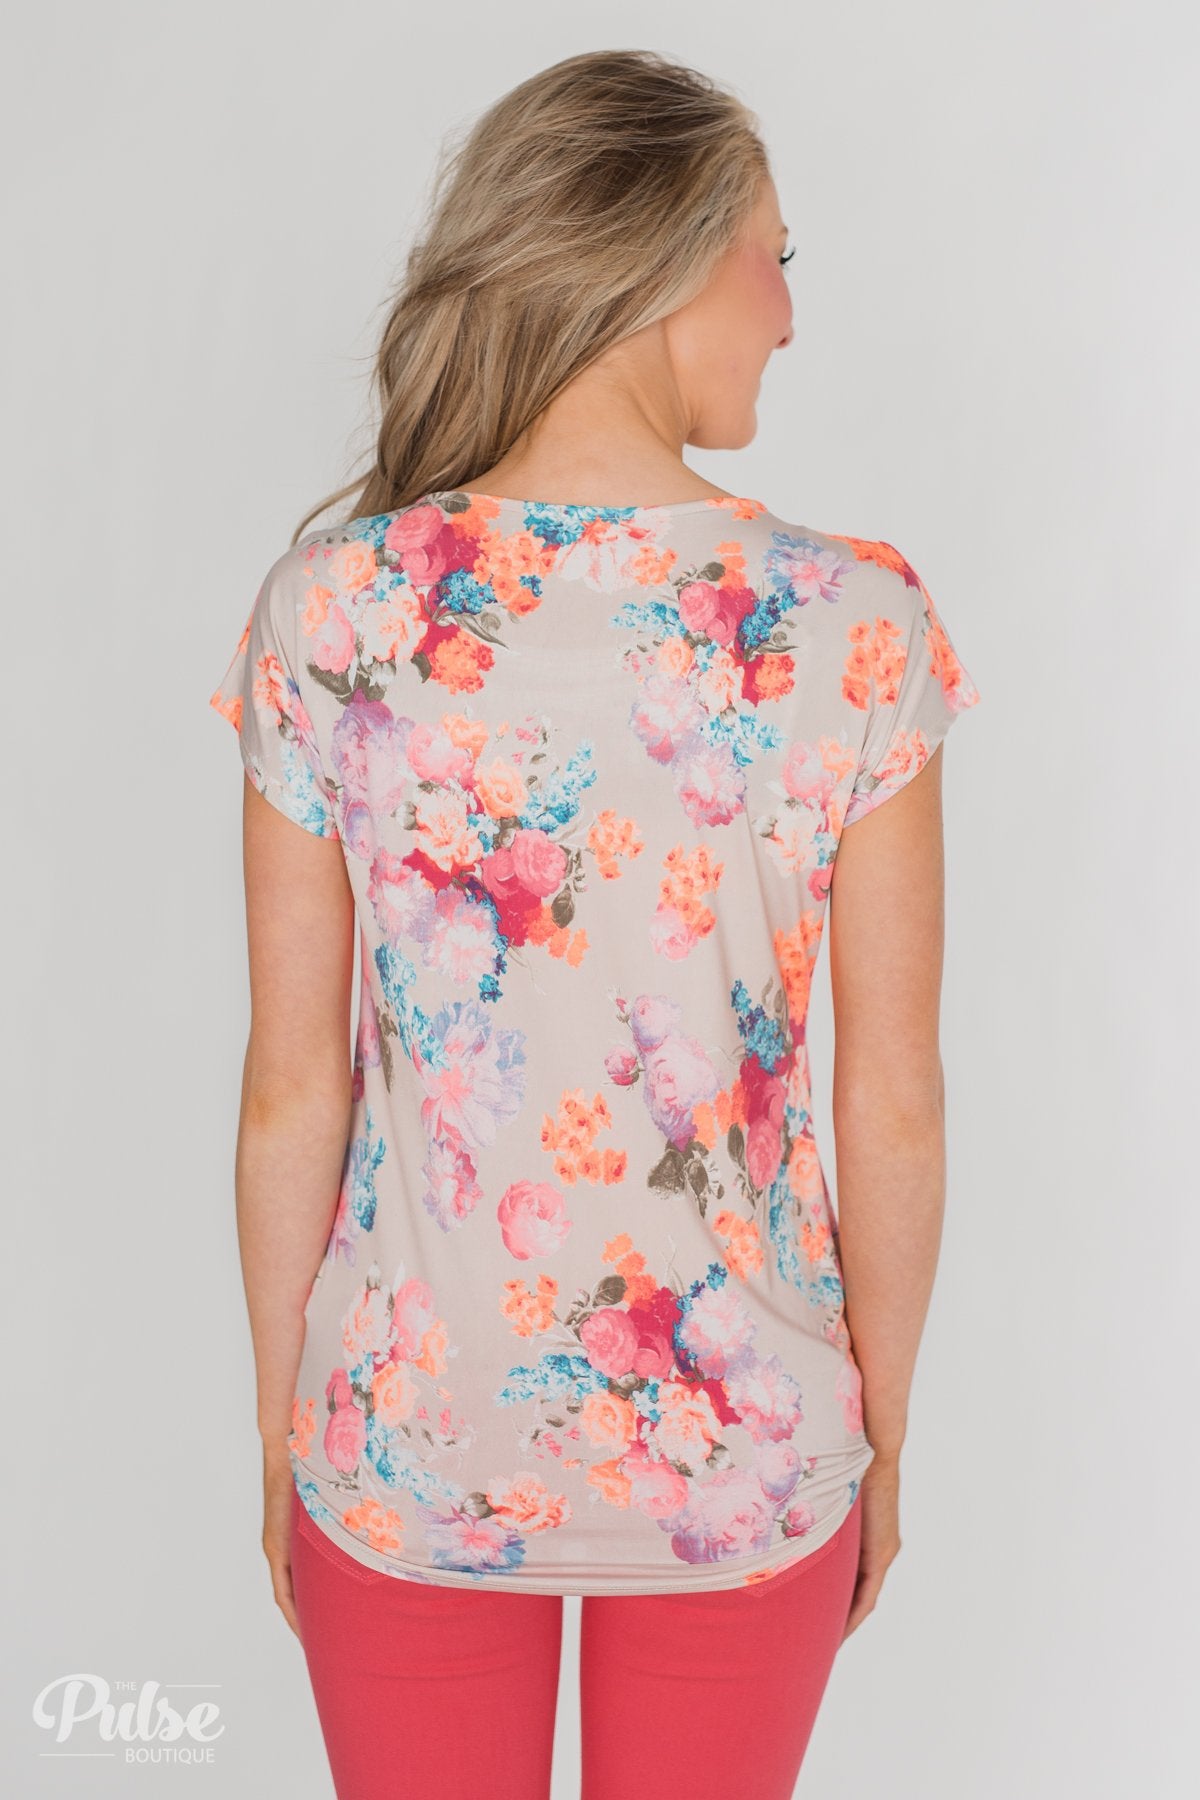 Coral Floral Knot Top- Nude